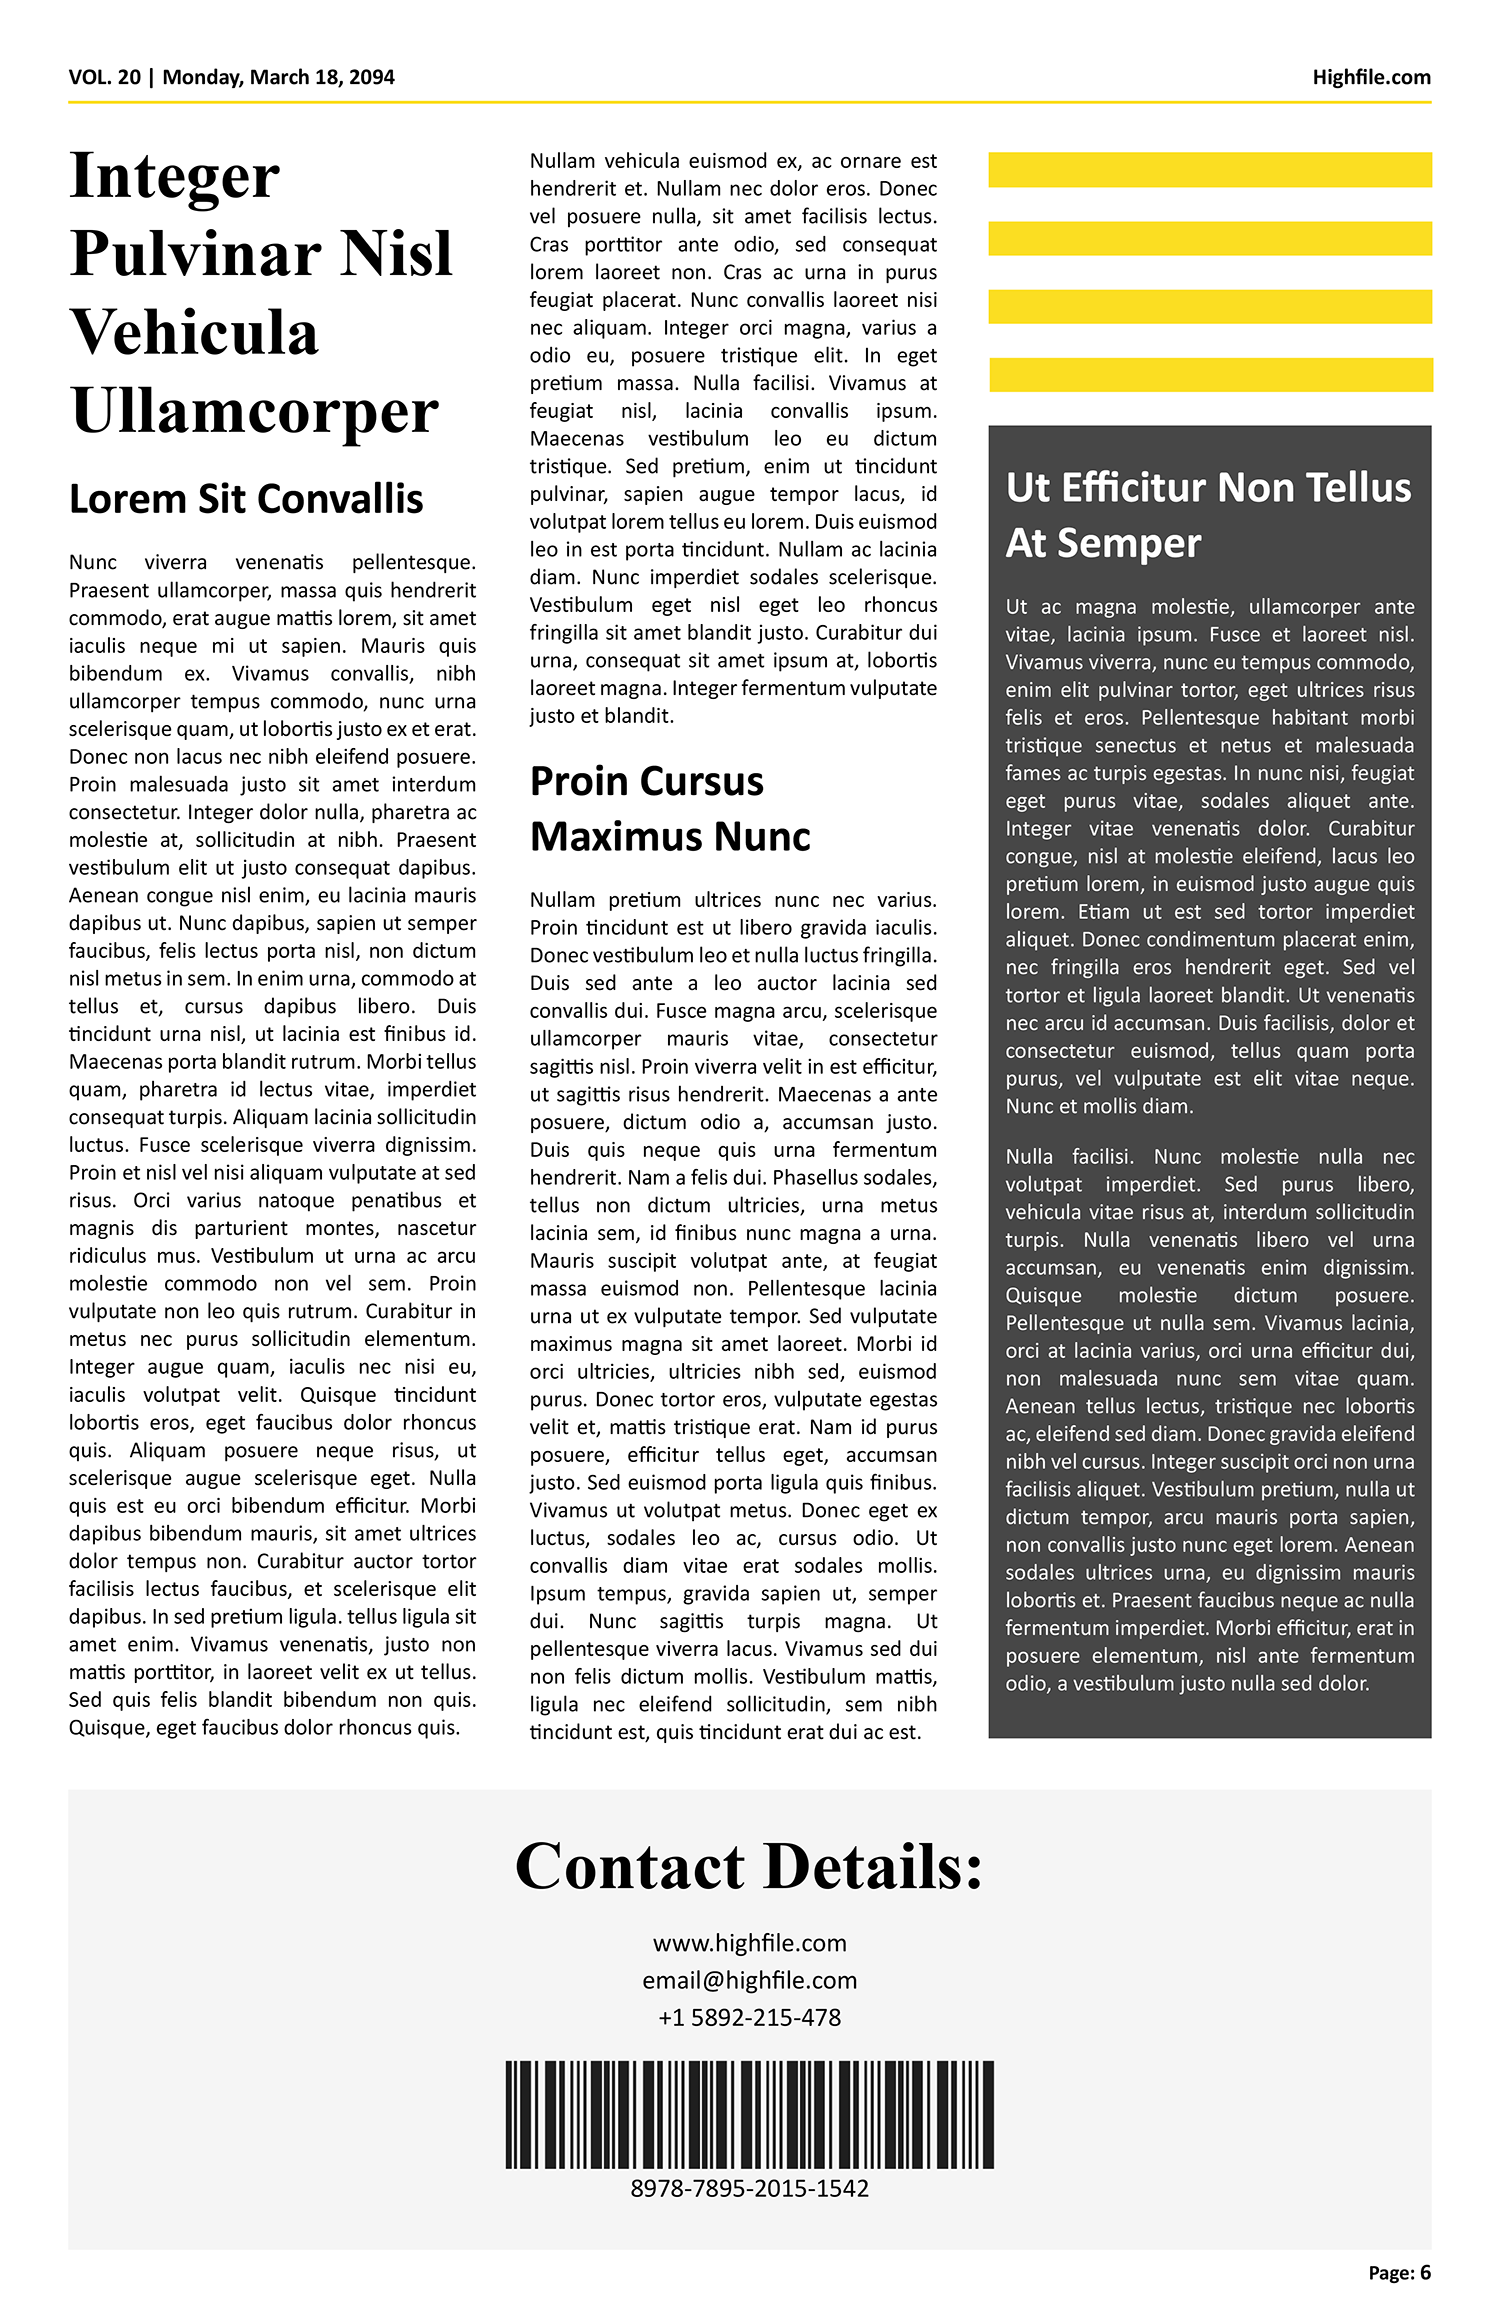 Modern Clean Newspaper Article Page Template - Page 06